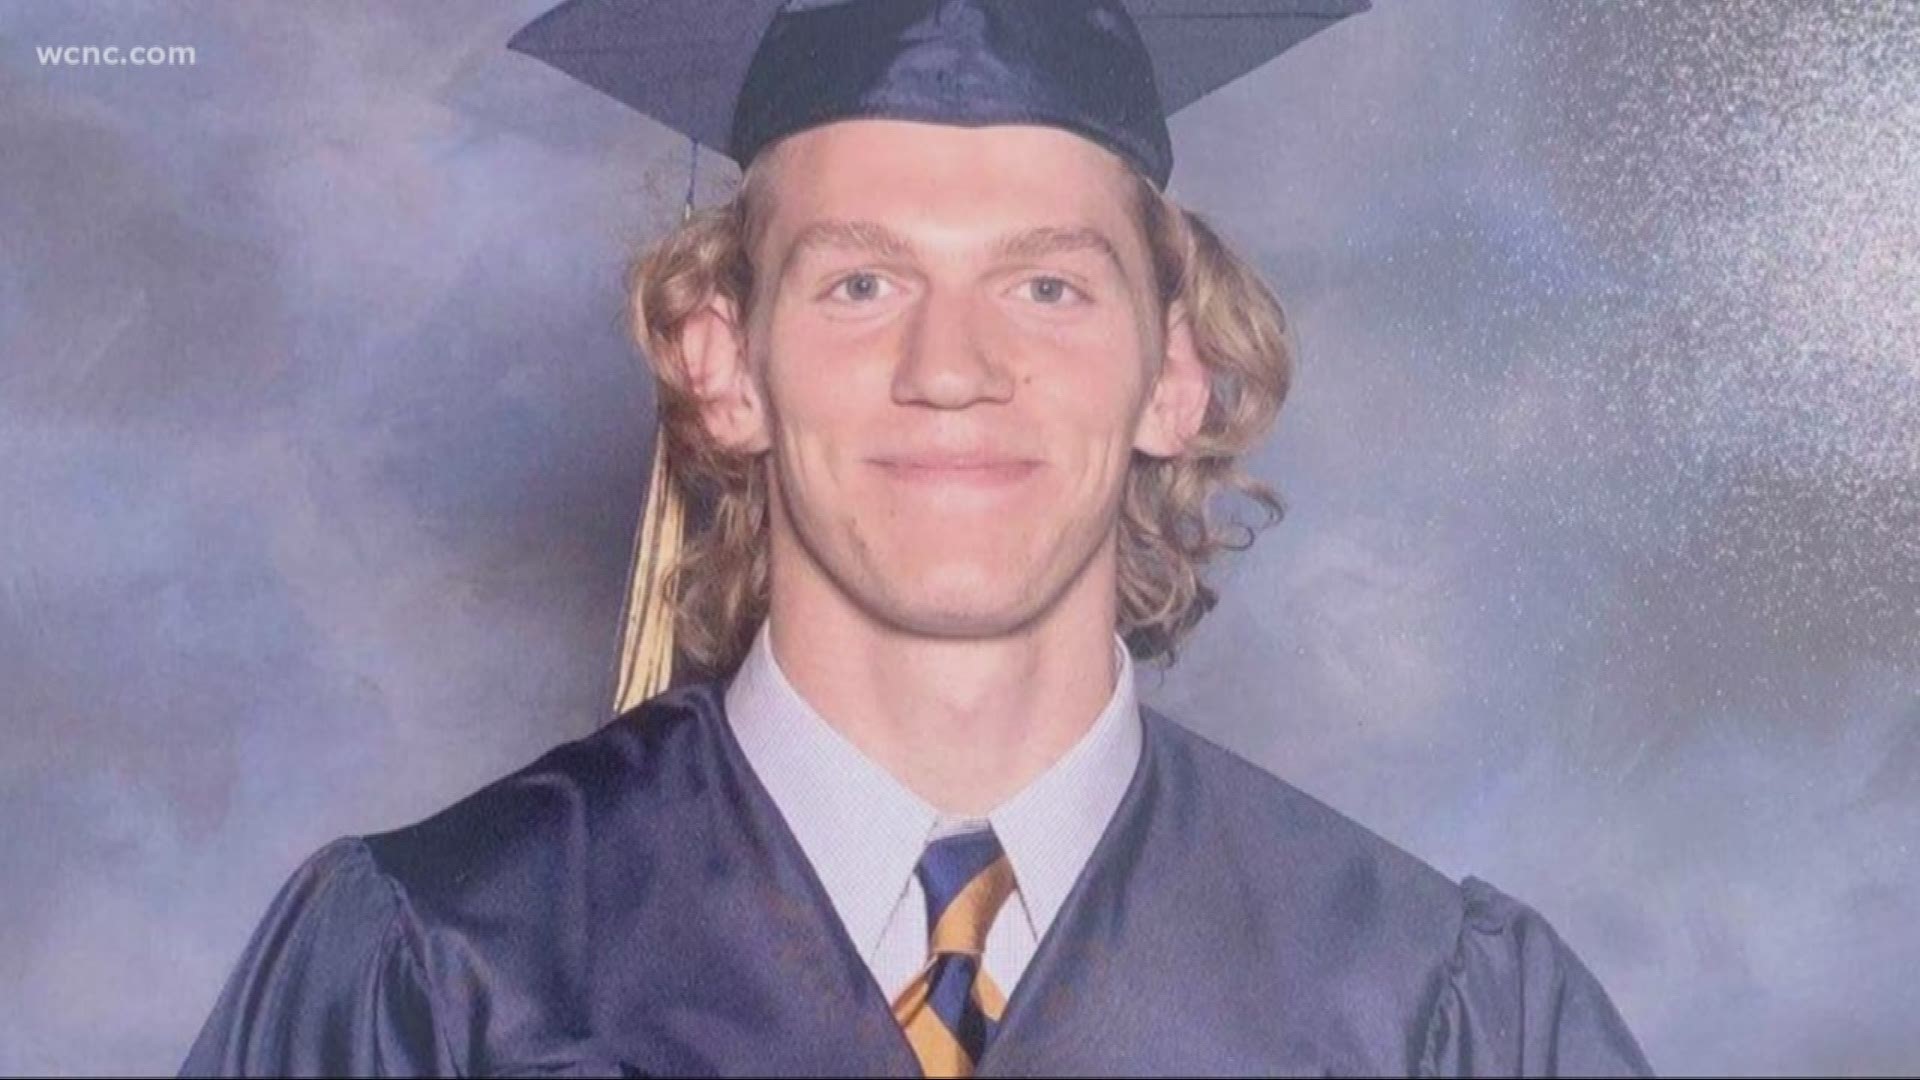 More than 80 Charlotte police officers were recognized for their community service but the biggest award at Wednesday's ceremony went to fallen UNCC student Riley Howell.